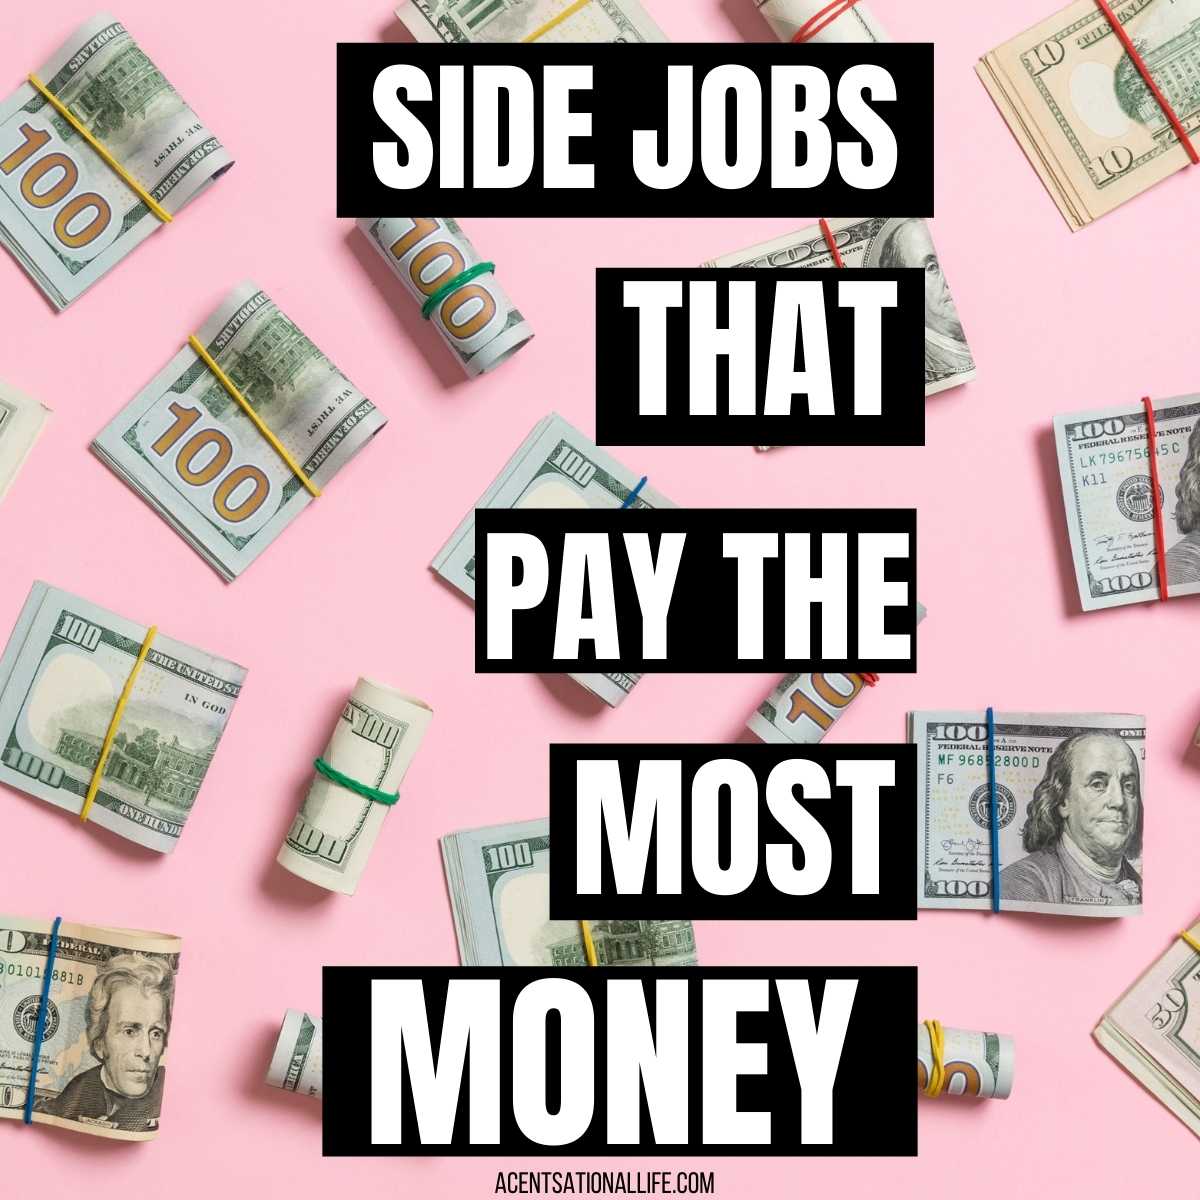 Easy jobs that pay $15 an hour